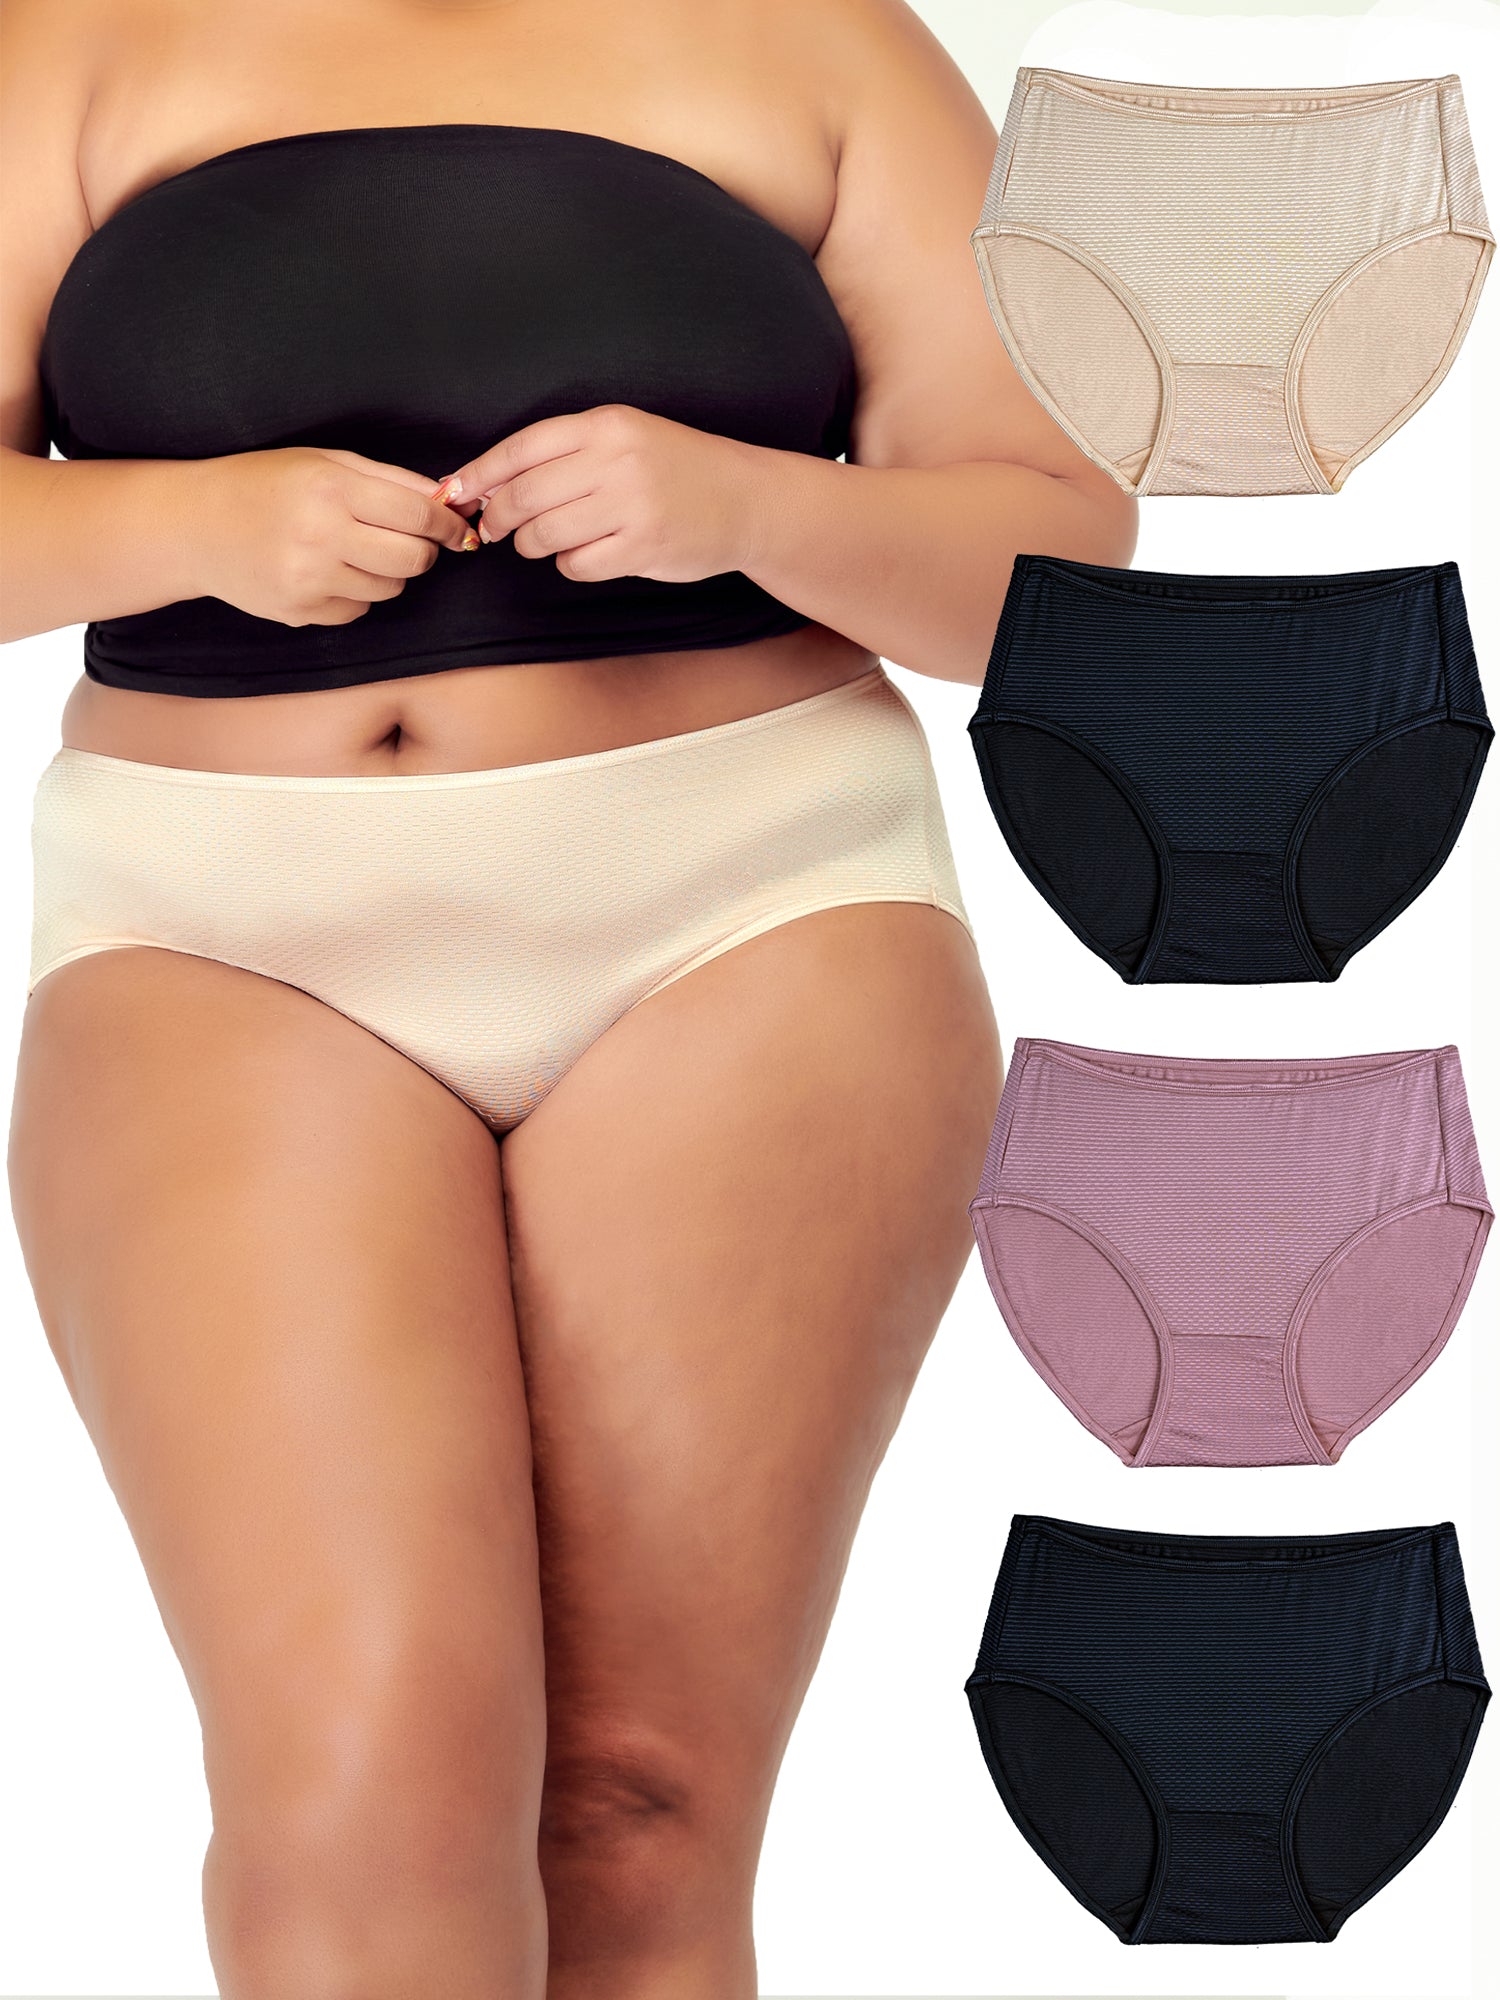 B2BODY Breathable Cool Touch Underwear Women - Boyshort Panties for Women  Small to Plus Size Multi Pack - ShopStyle Knickers